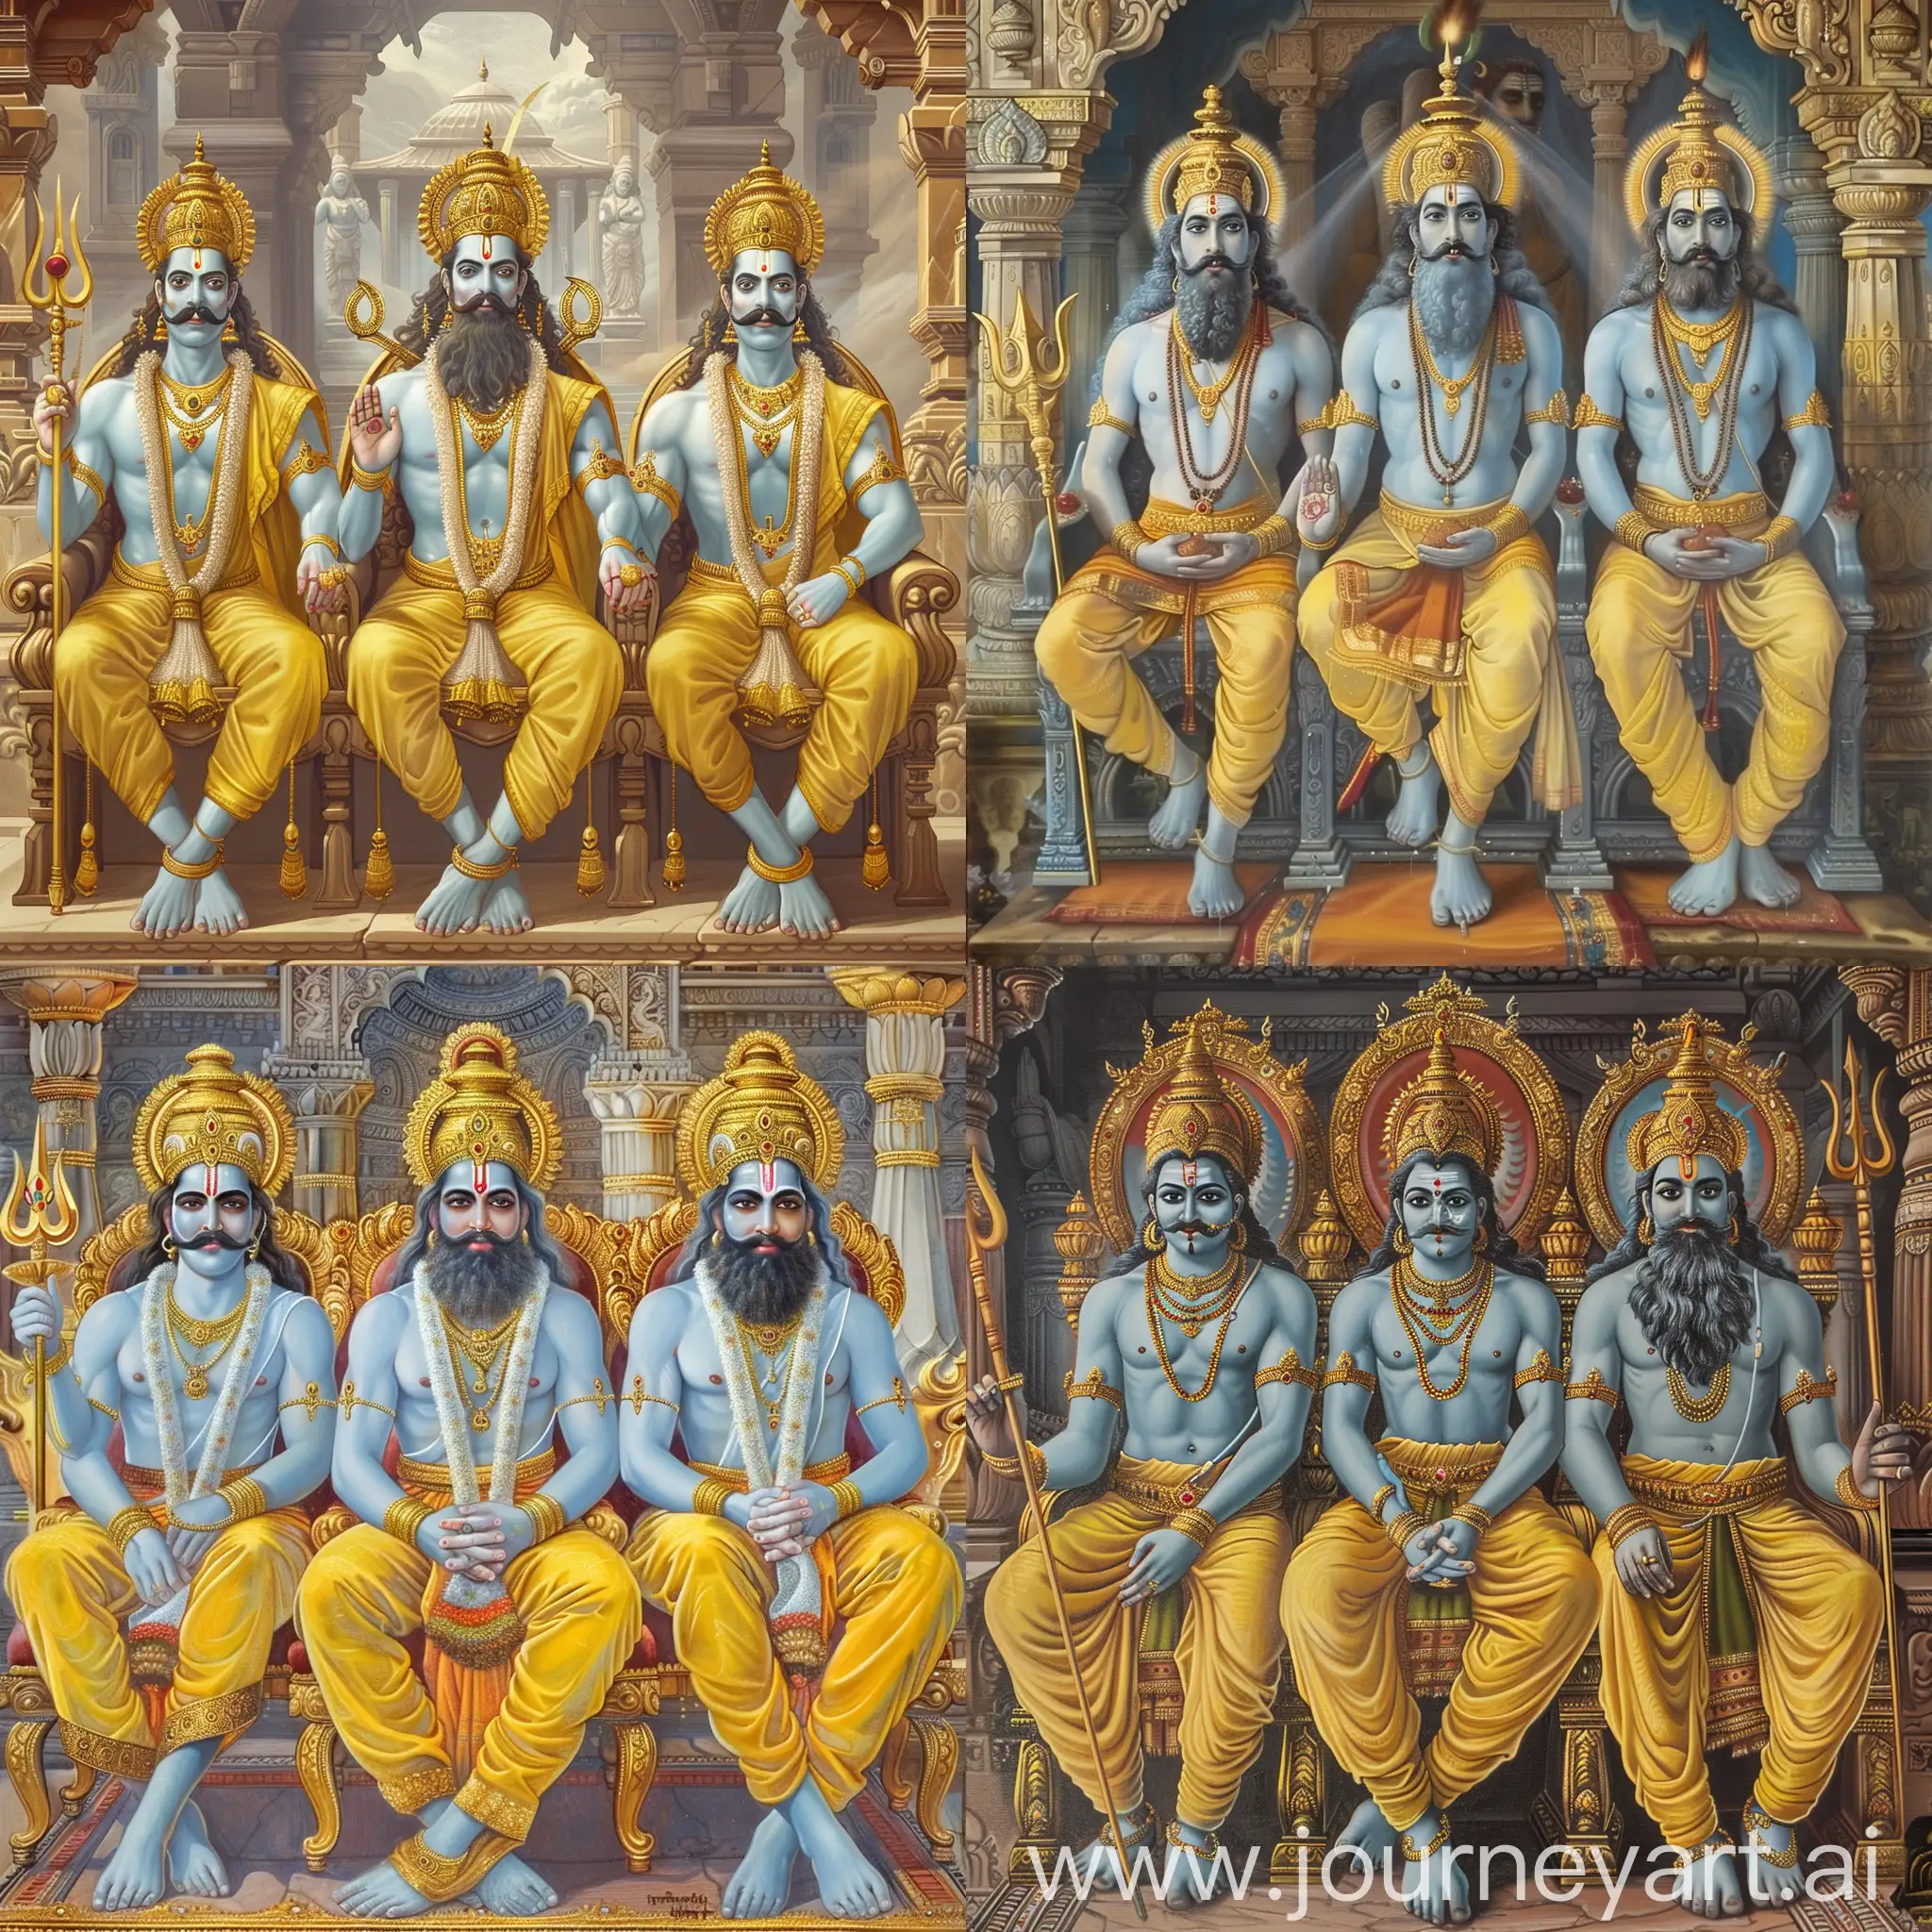 painting mode : 

three Hindu gods are sitting on their imperial thrones, they all have Indian style mustache, light blue skin and yellow pants,

Shiva is the left one, he holds a golden trident in his hand,

Vishnu is the right one, he holds a long golden mace in his hand,

Brahma with beards is the center one,
they are all inside a splendid Hindu temple,